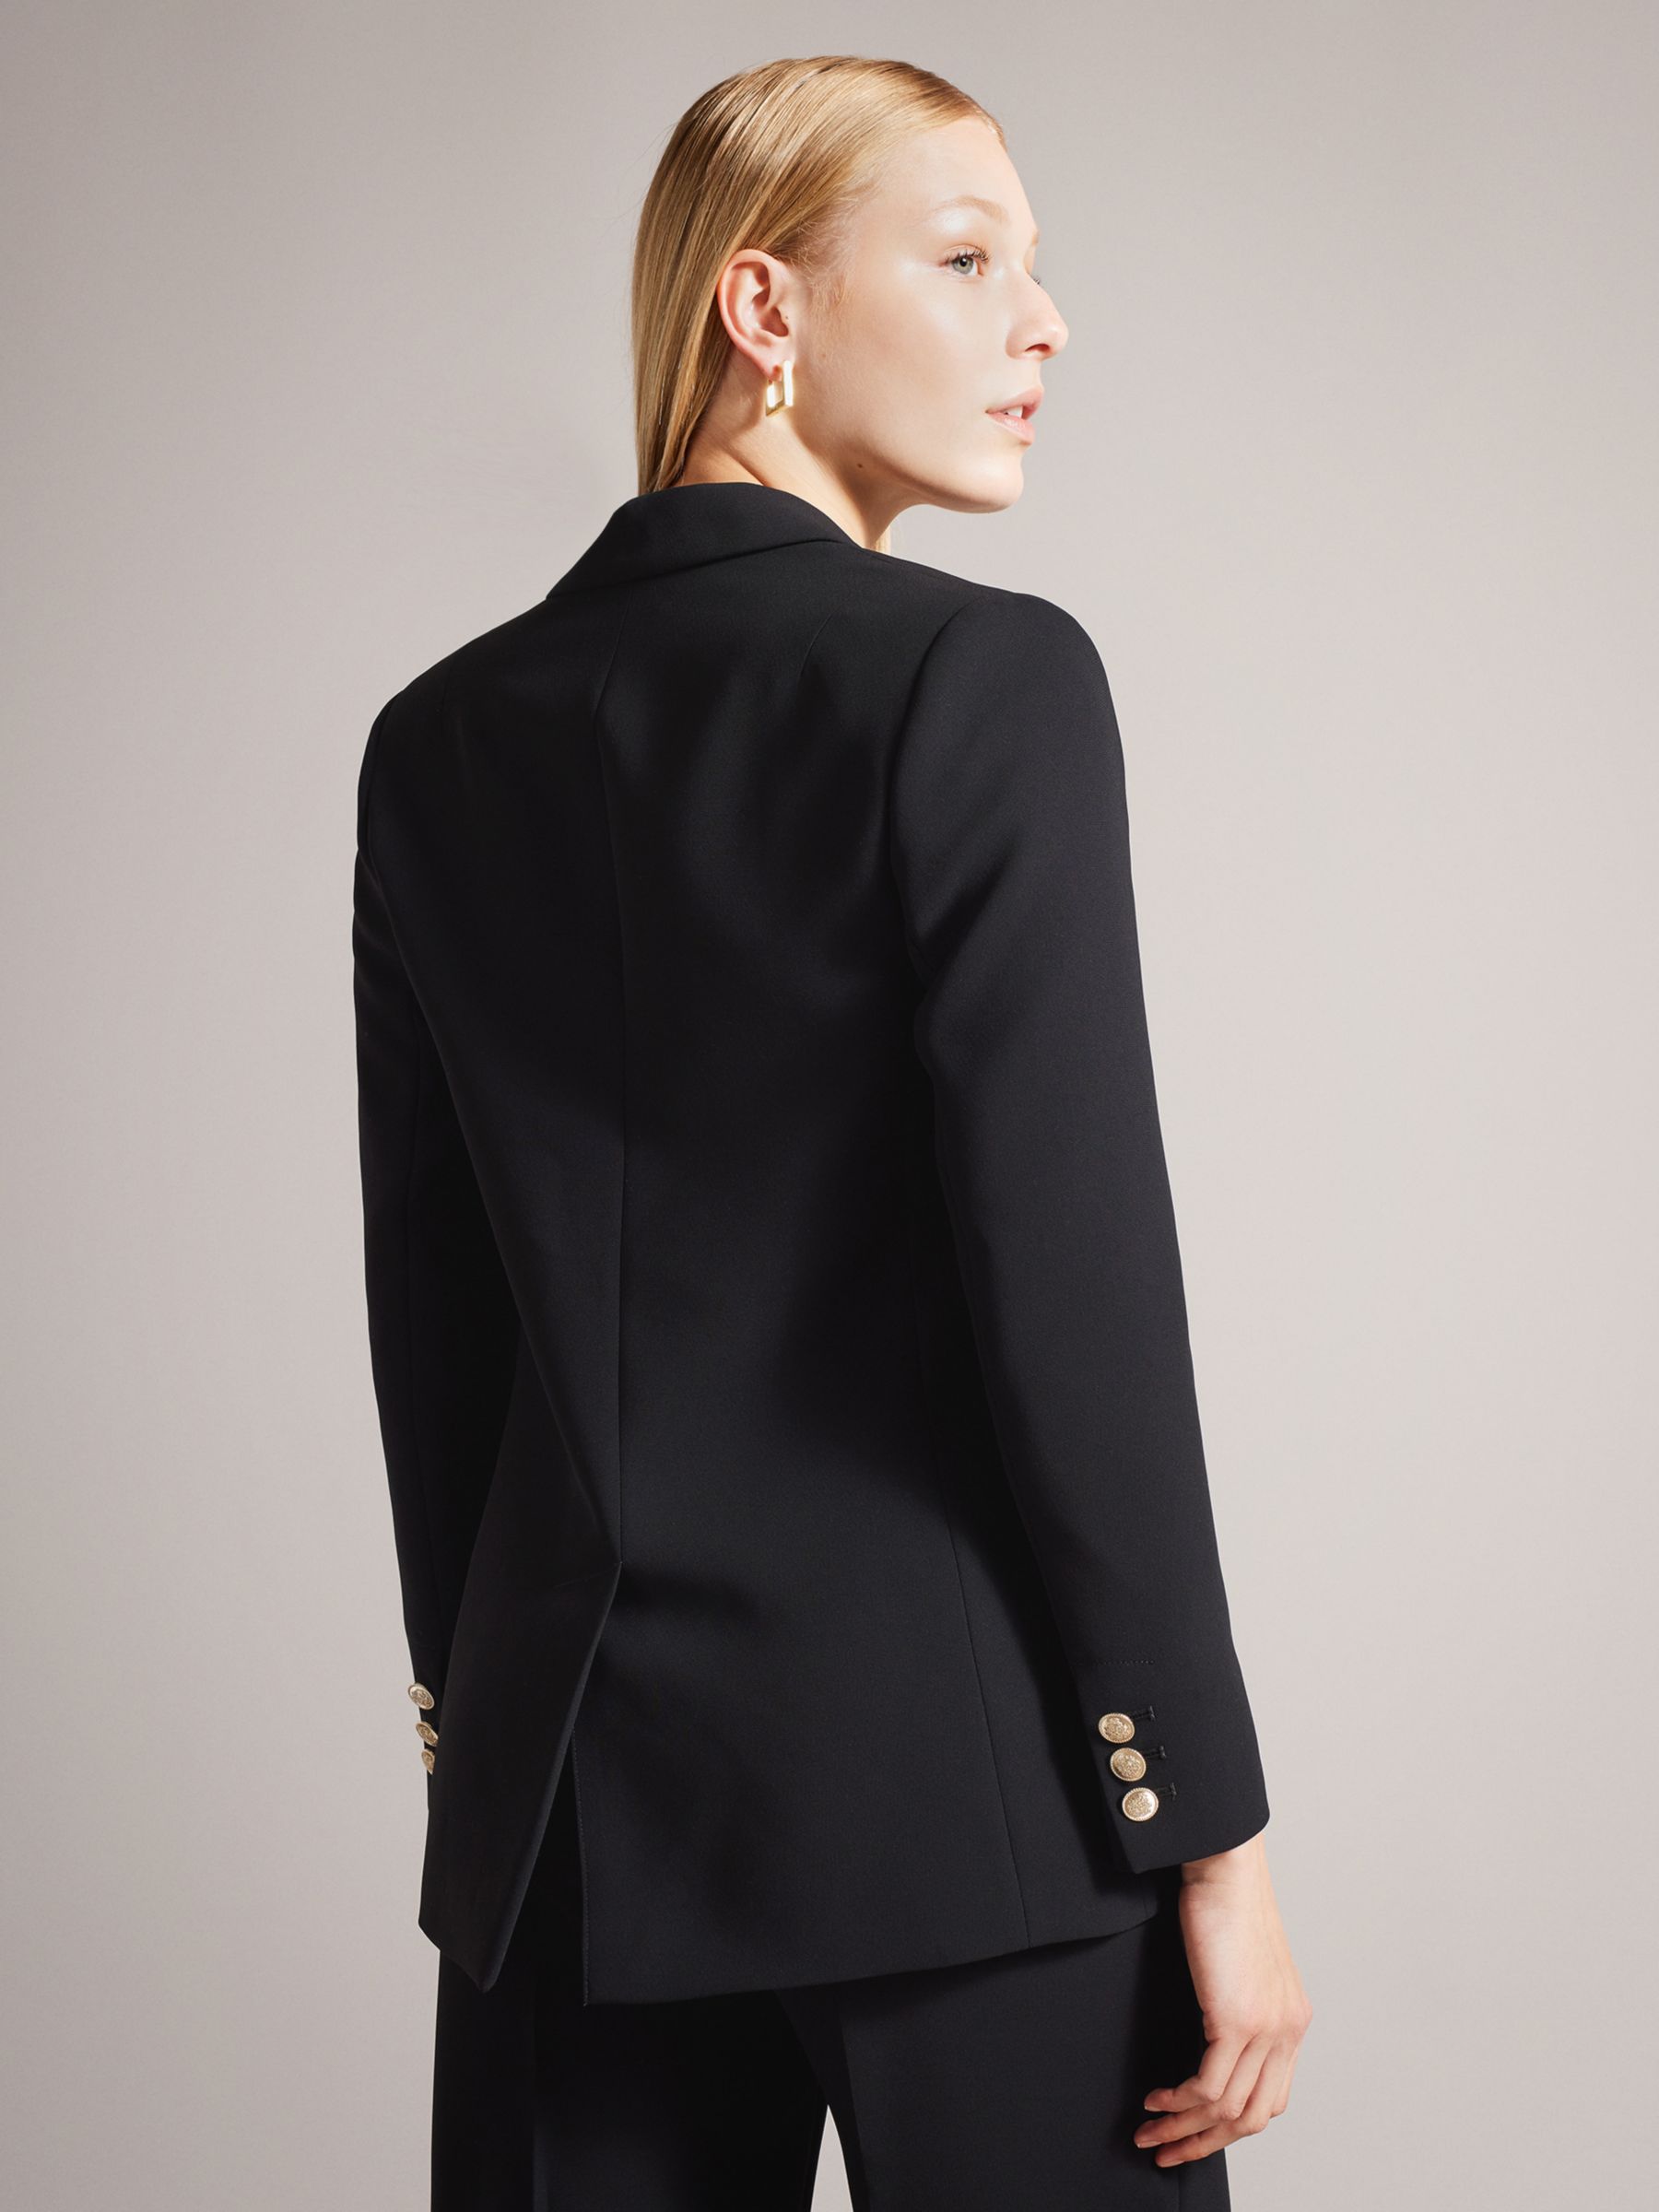 Ted Baker Llayla Double Breasted Blazer, Black at John Lewis & Partners